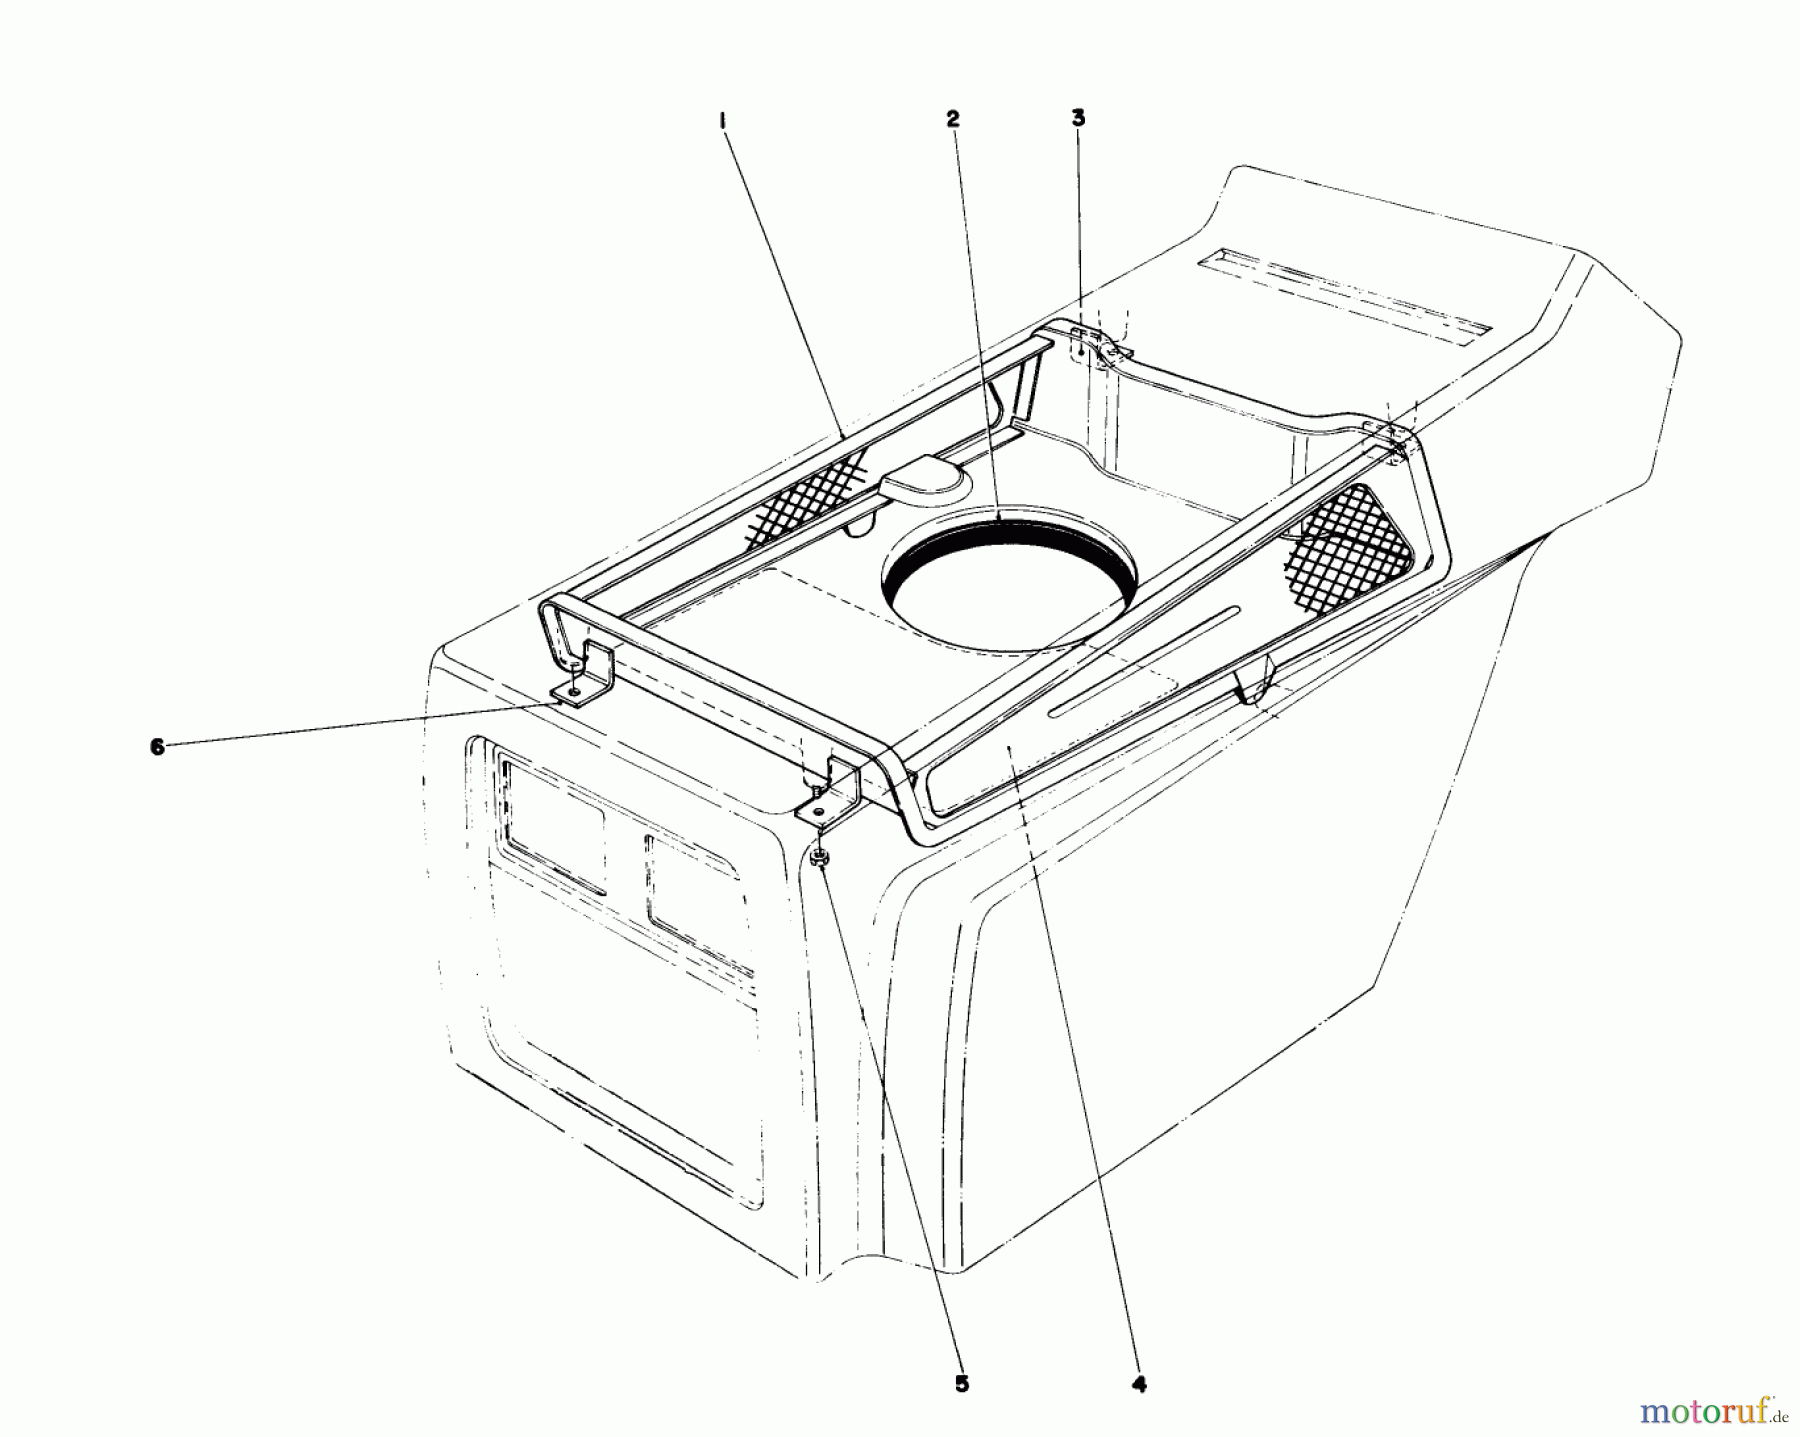  Toro Neu Mowers, Lawn & Garden Tractor Seite 1 57356 (11-42) - Toro 11-42 Lawn Tractor, 1985 (5000001-5999999) HOOD DUCT ASSEMBLY